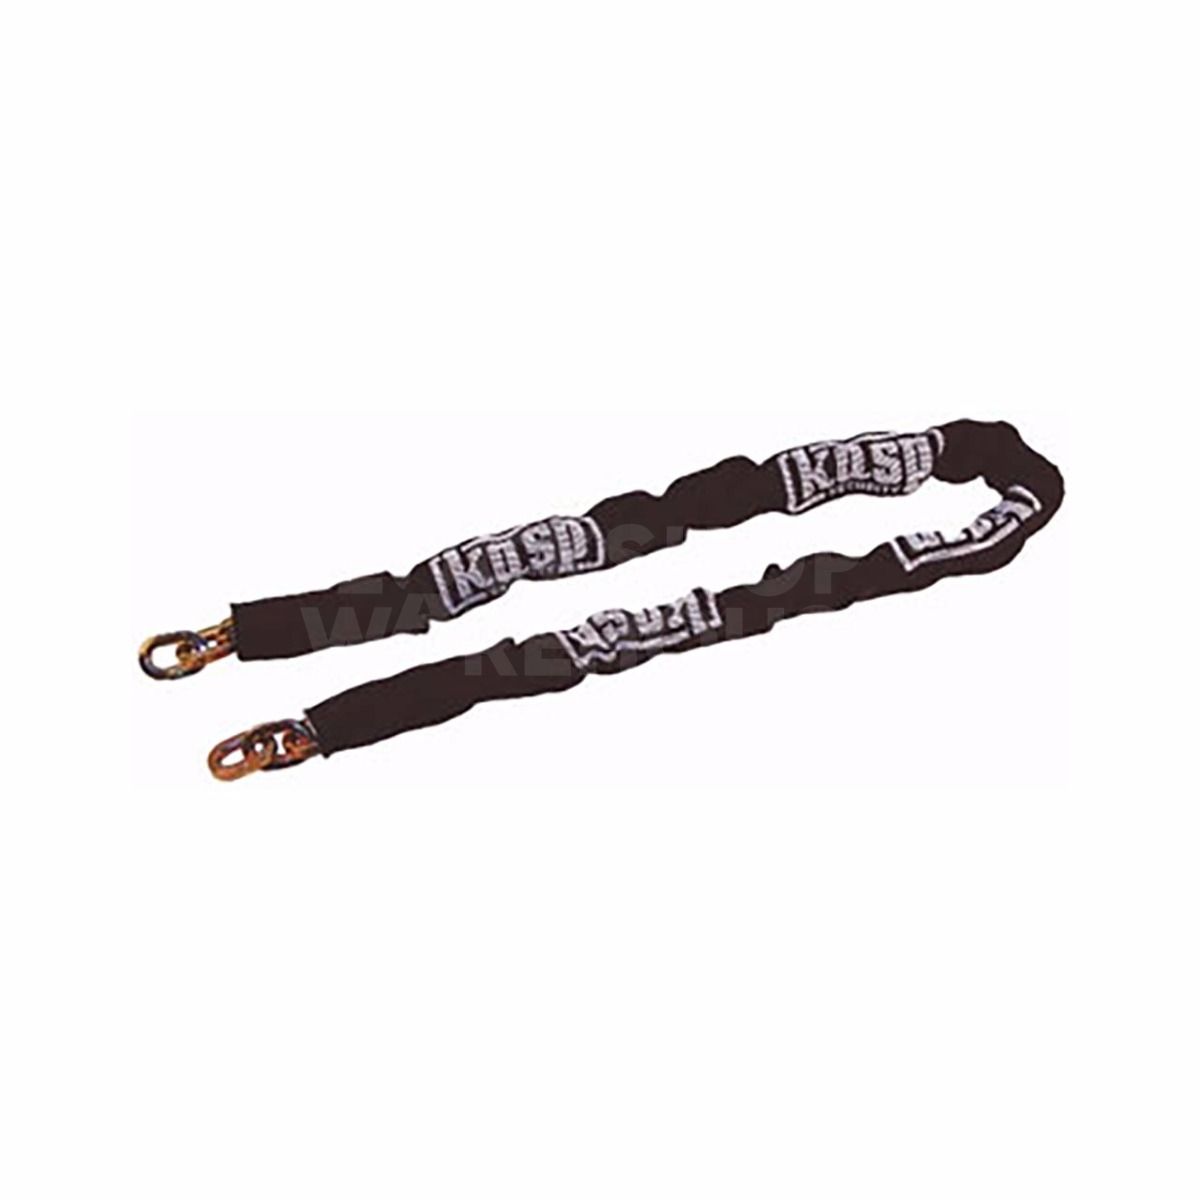 Kasp Security Chain 6mm